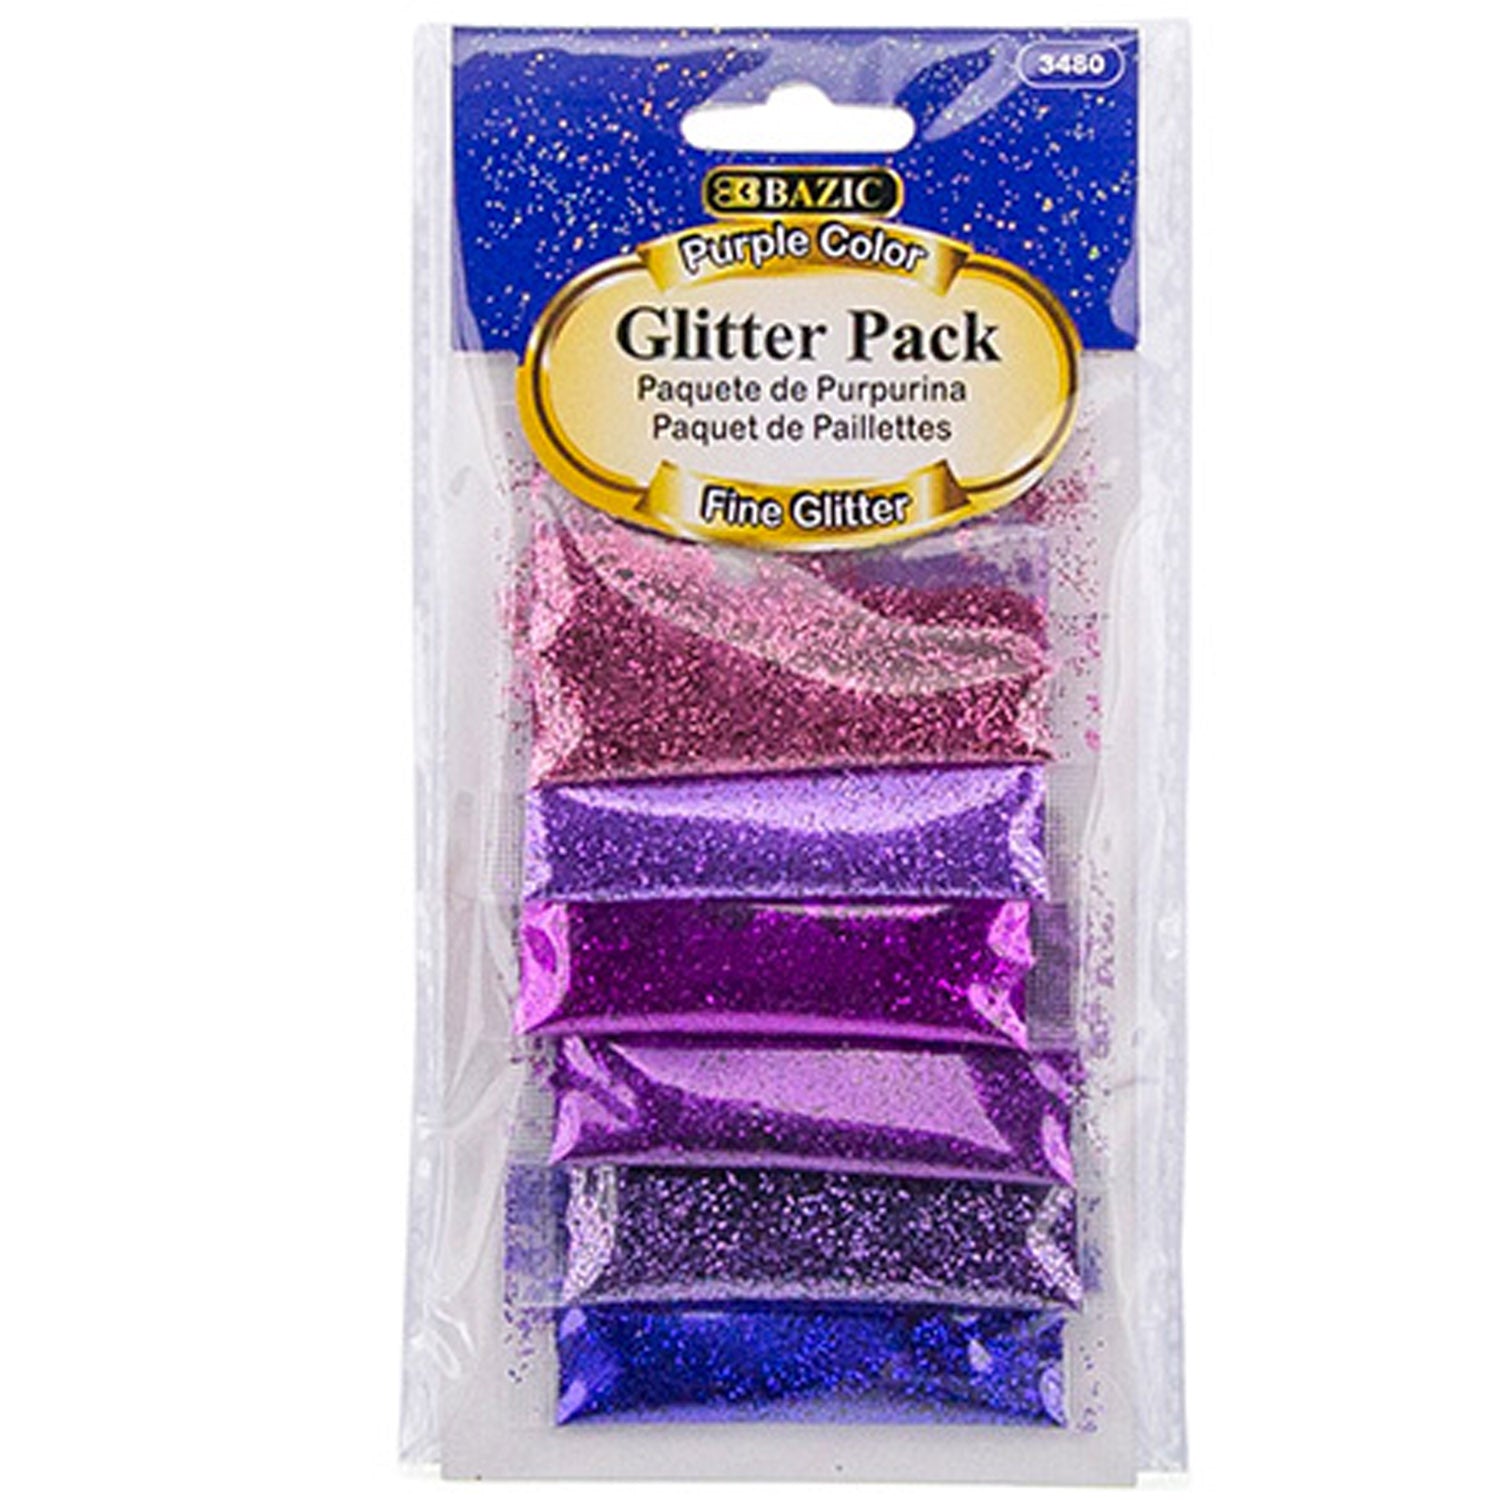 Purple Color Glitter Pack for your Art | 0.07 oz (2g)